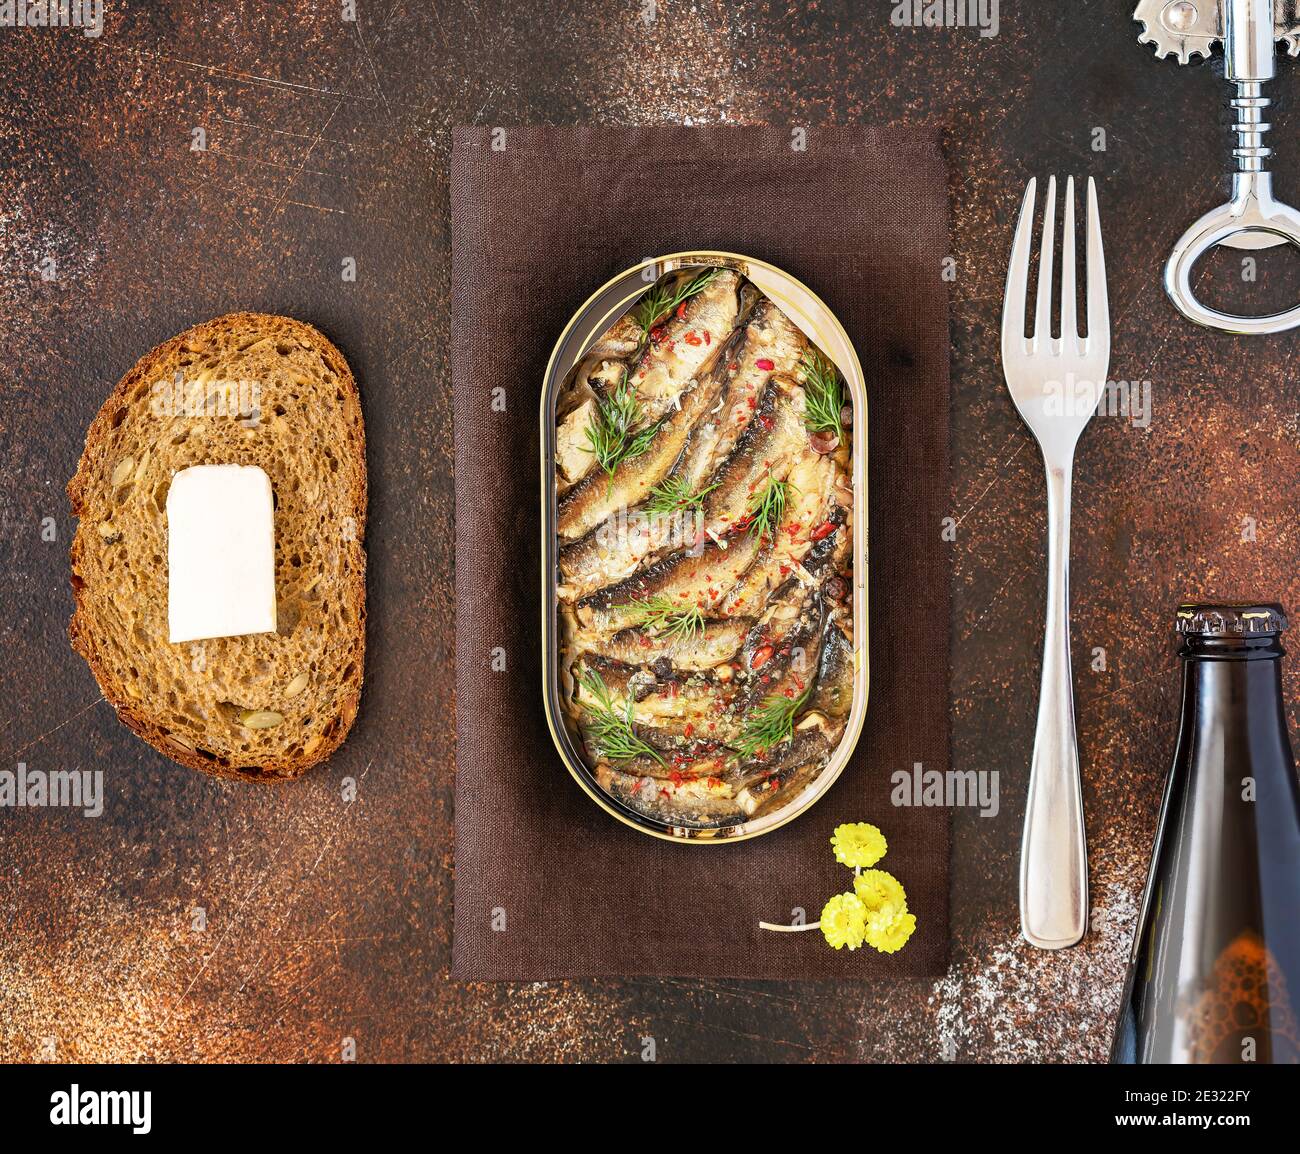 Open tin of Baltic sprats in oil with spices, a slace of bread with butter, a fork and bottle of dark beer on an old brown background. Fish appetizer Stock Photo